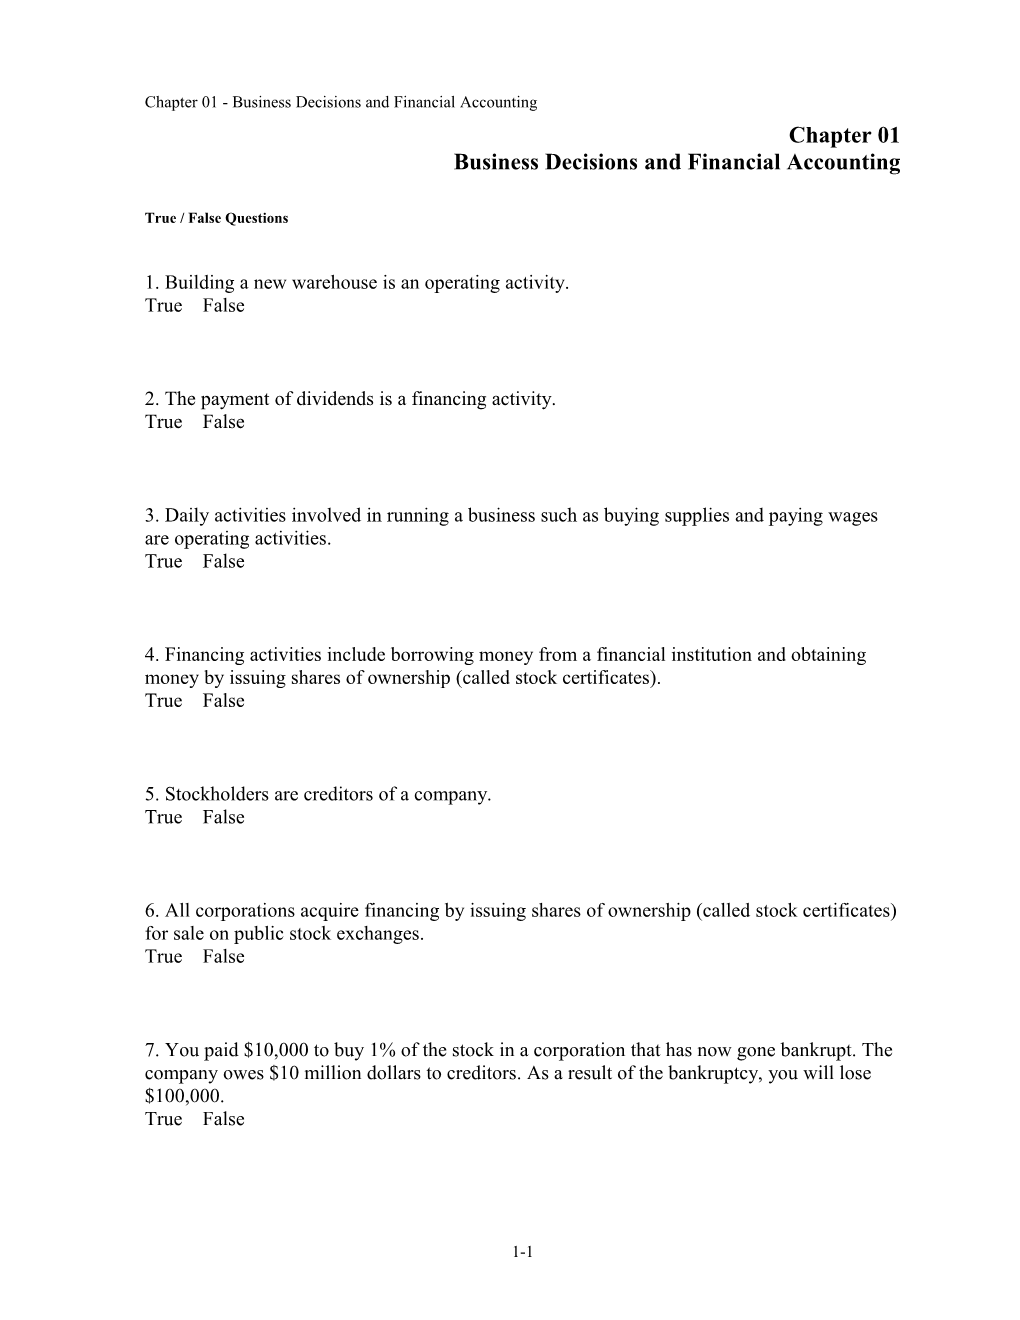 Chapter 01 Business Decisions and Financial Accounting